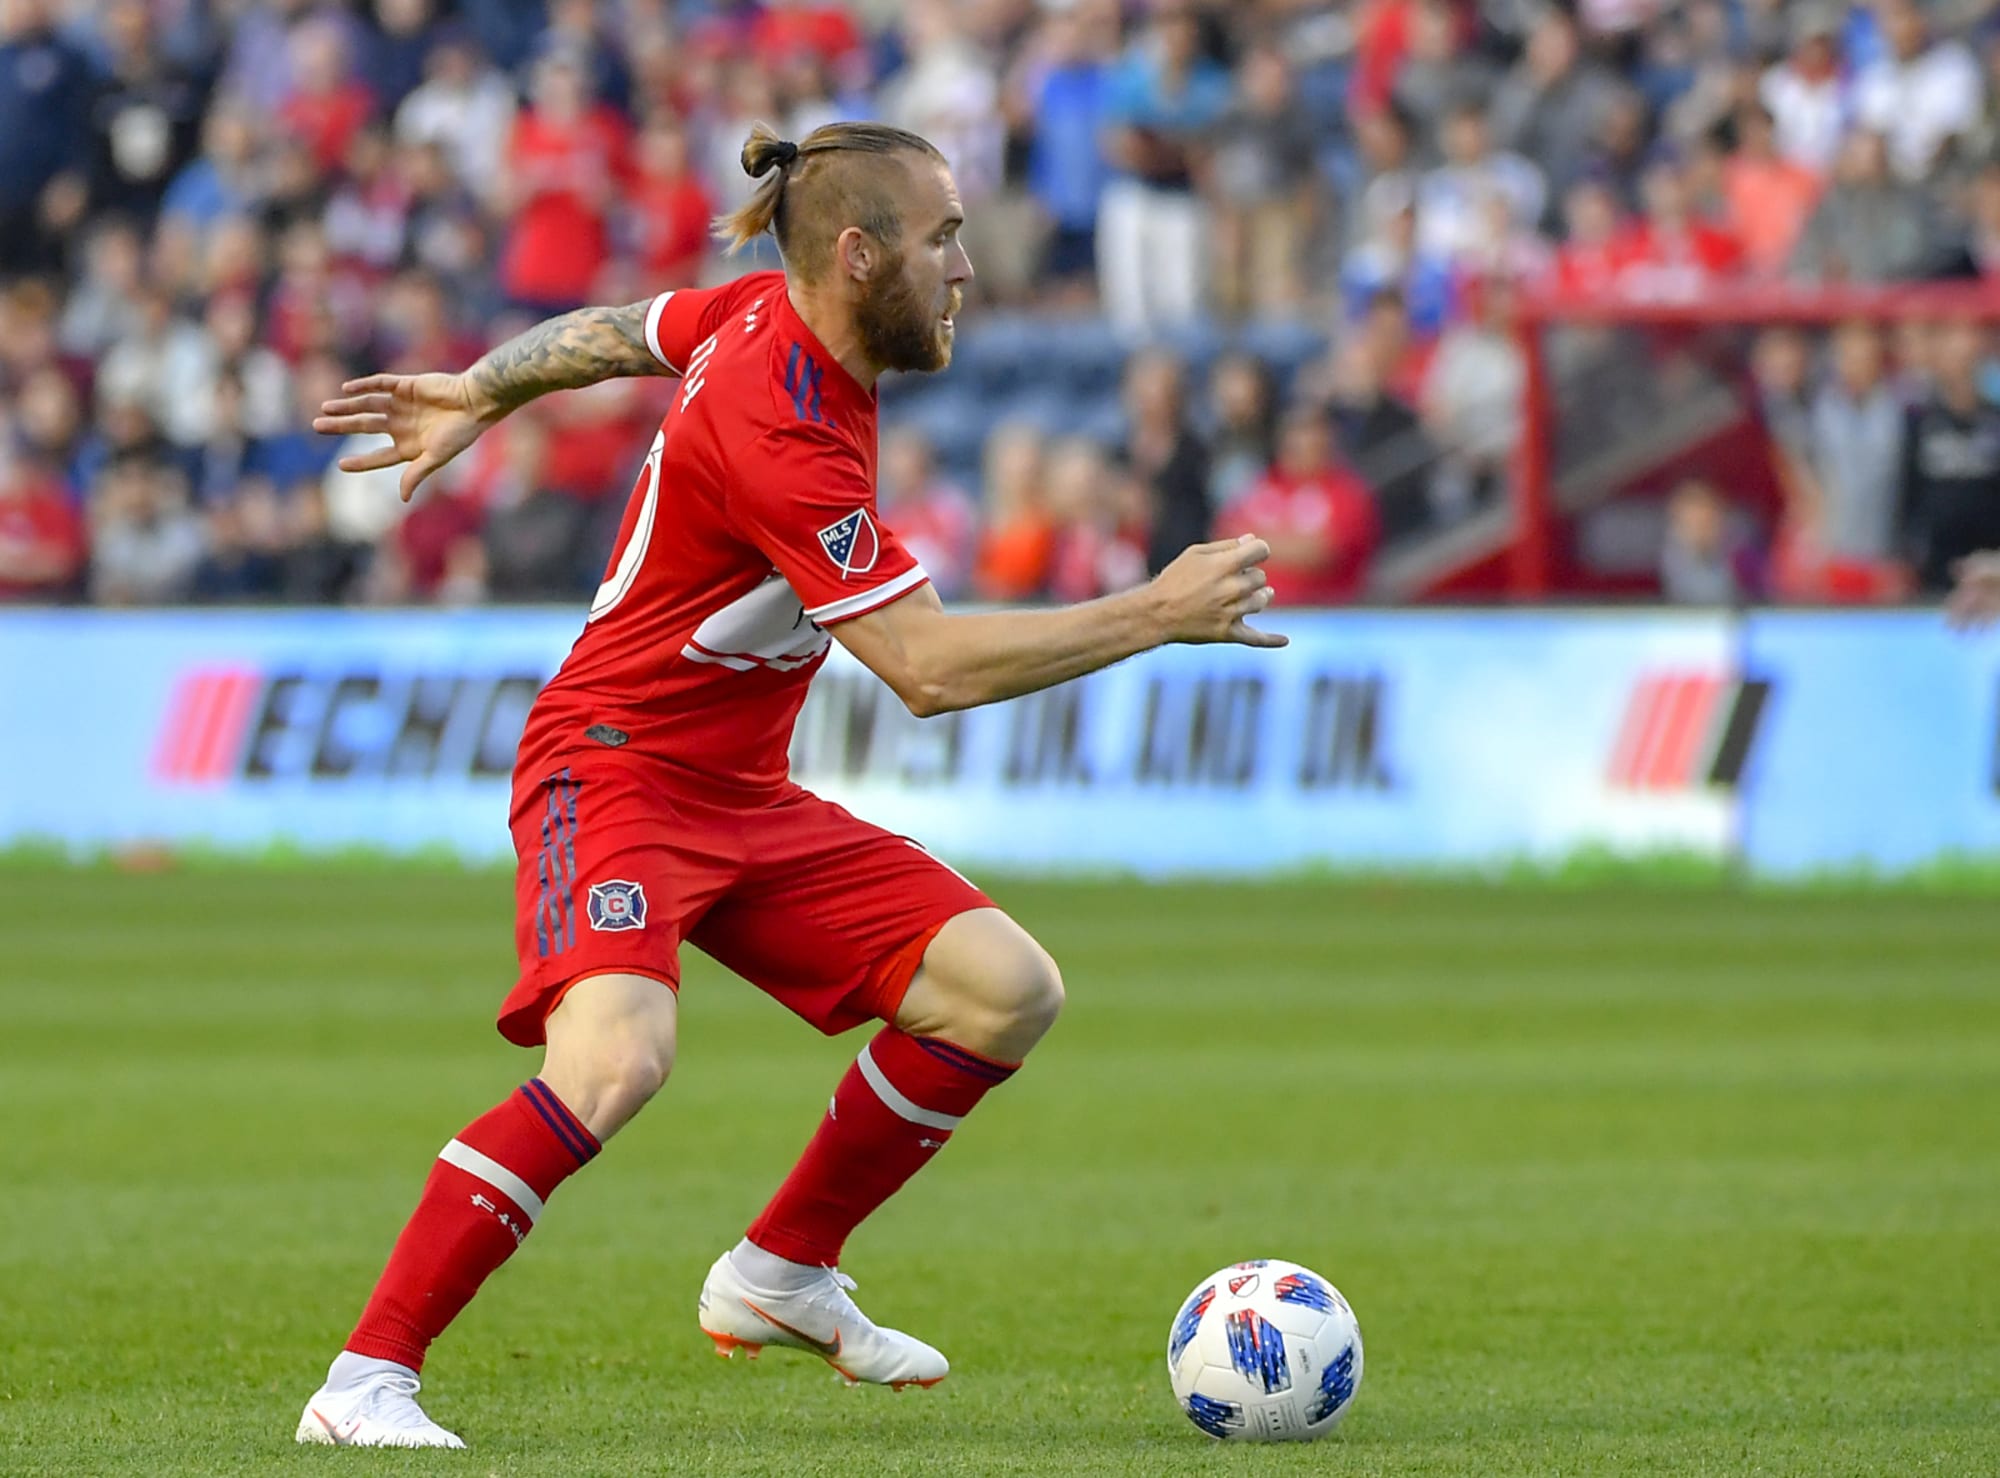 Chicago Fire Vs FC Dallas: 5 things we learned - Damning depth